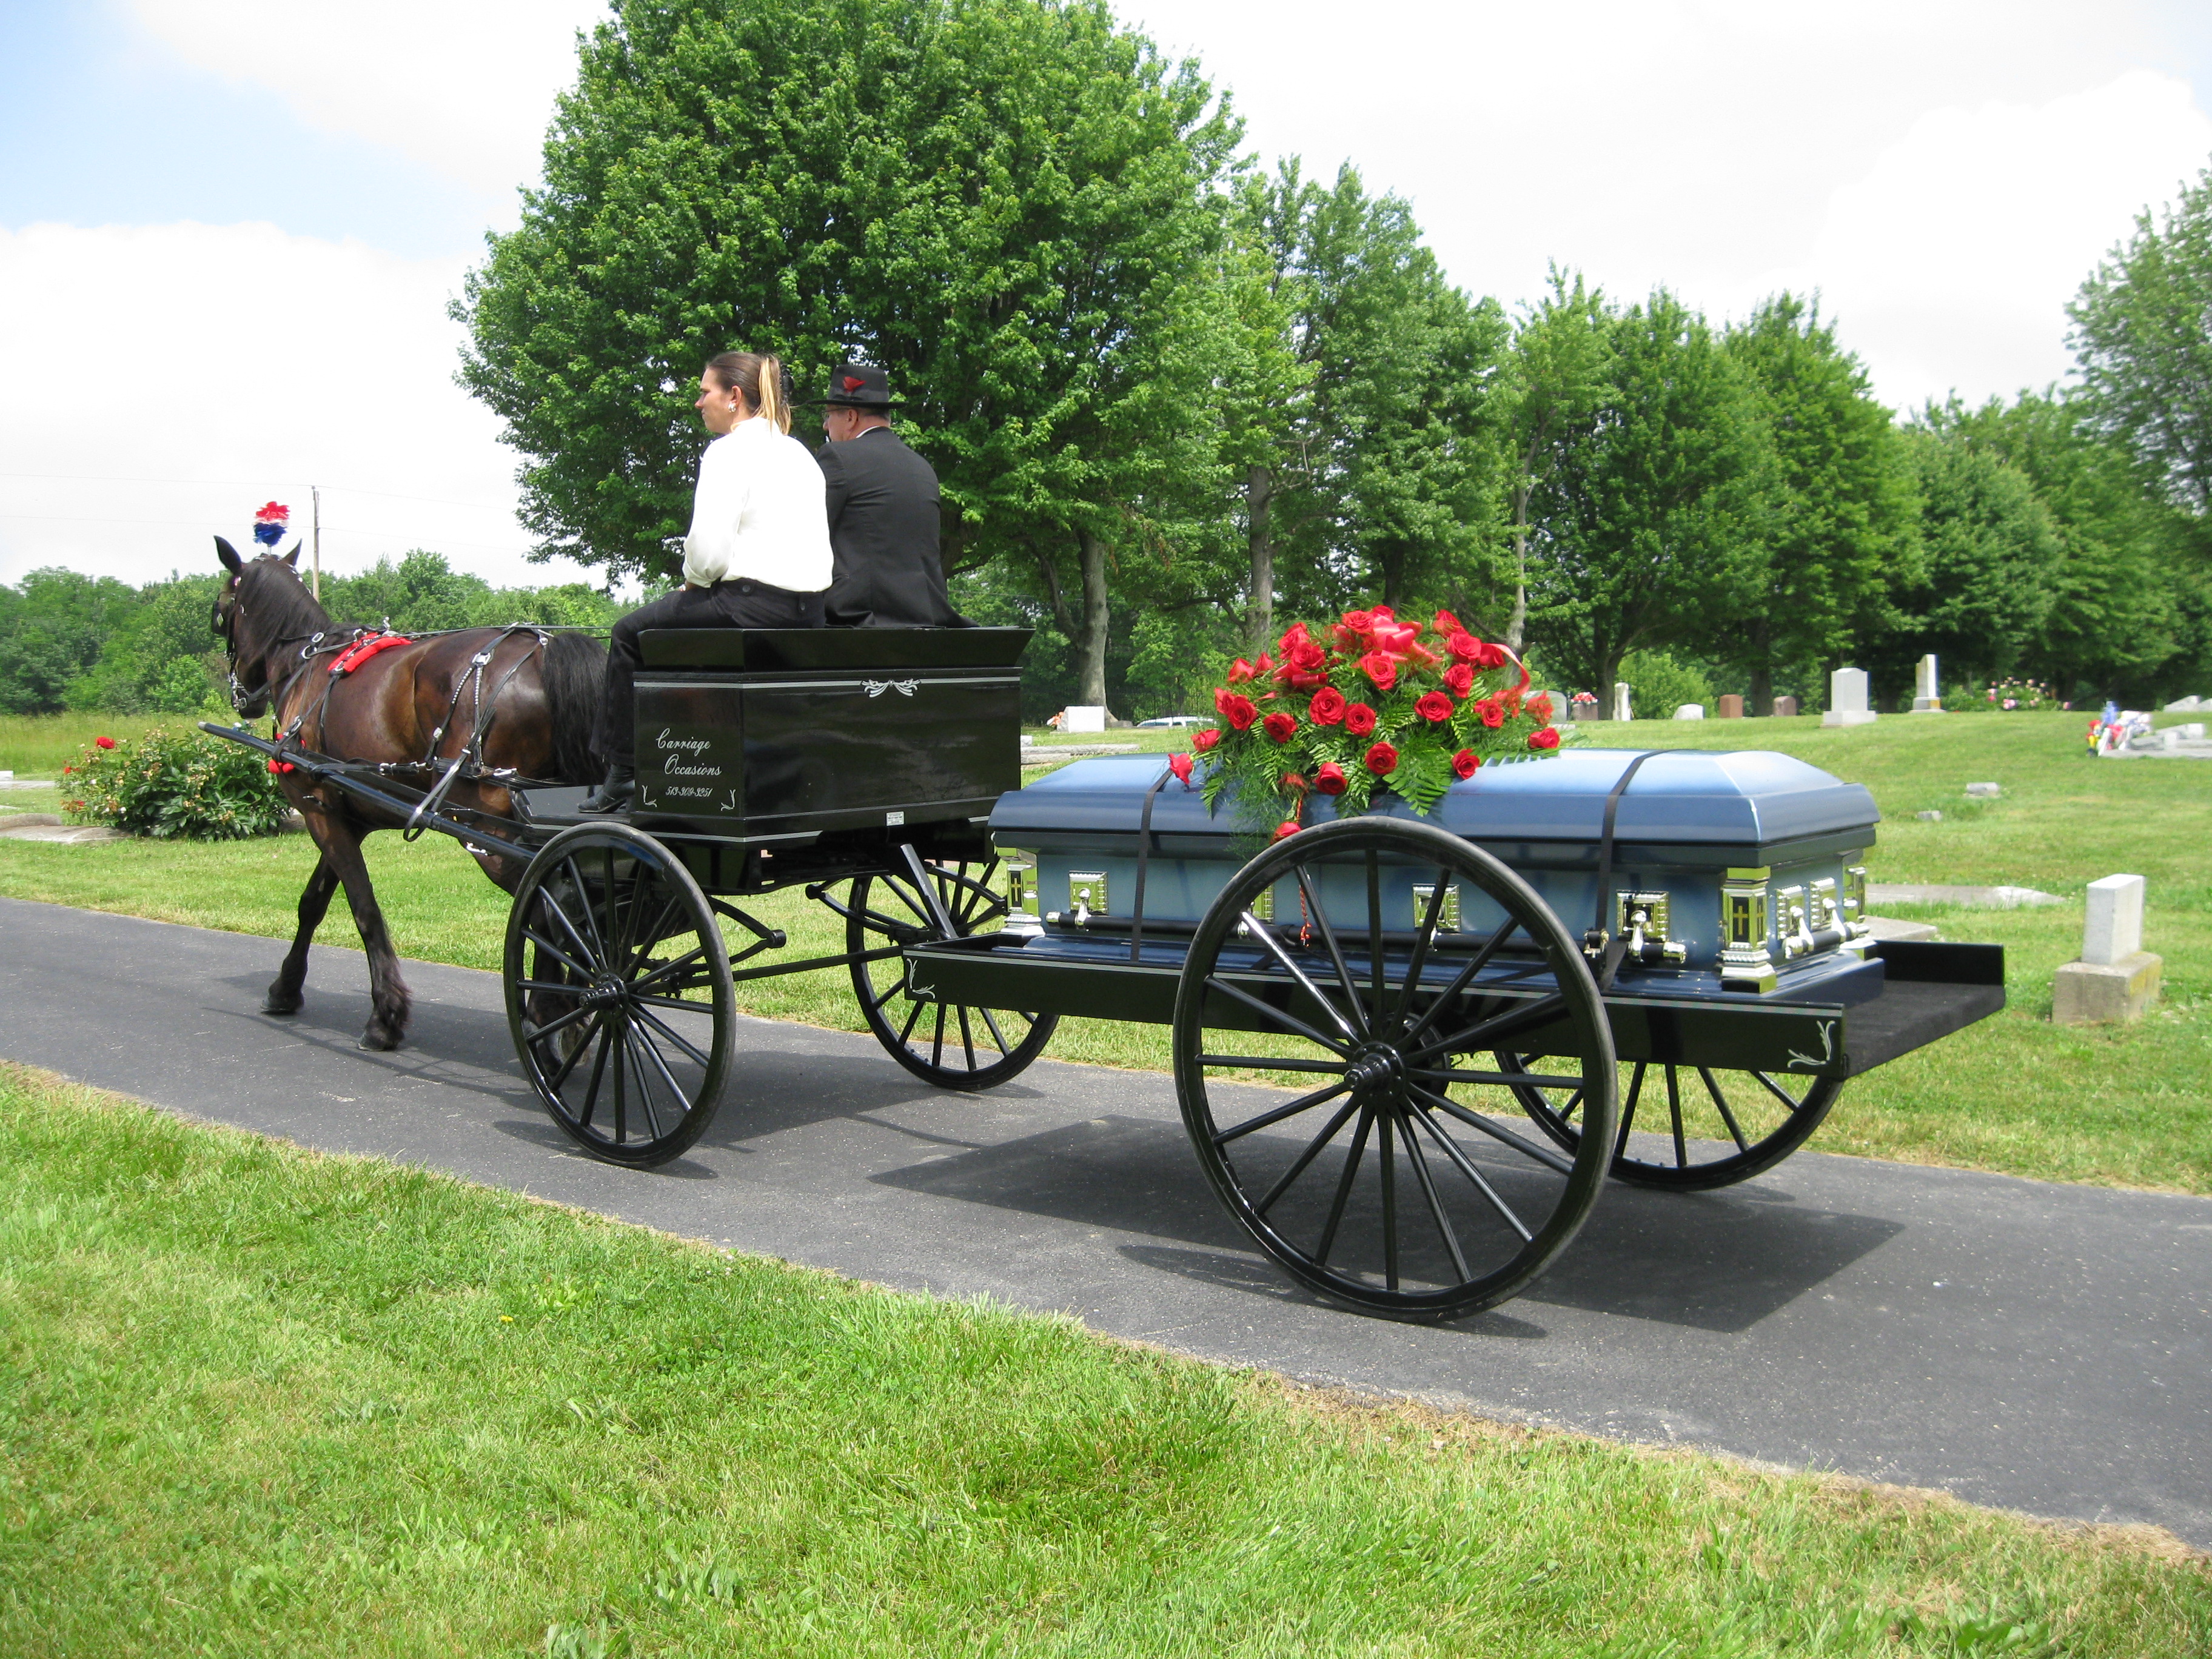 Indiana, Kentucy and Ohio Funerals for active military, veterans and animal lovers